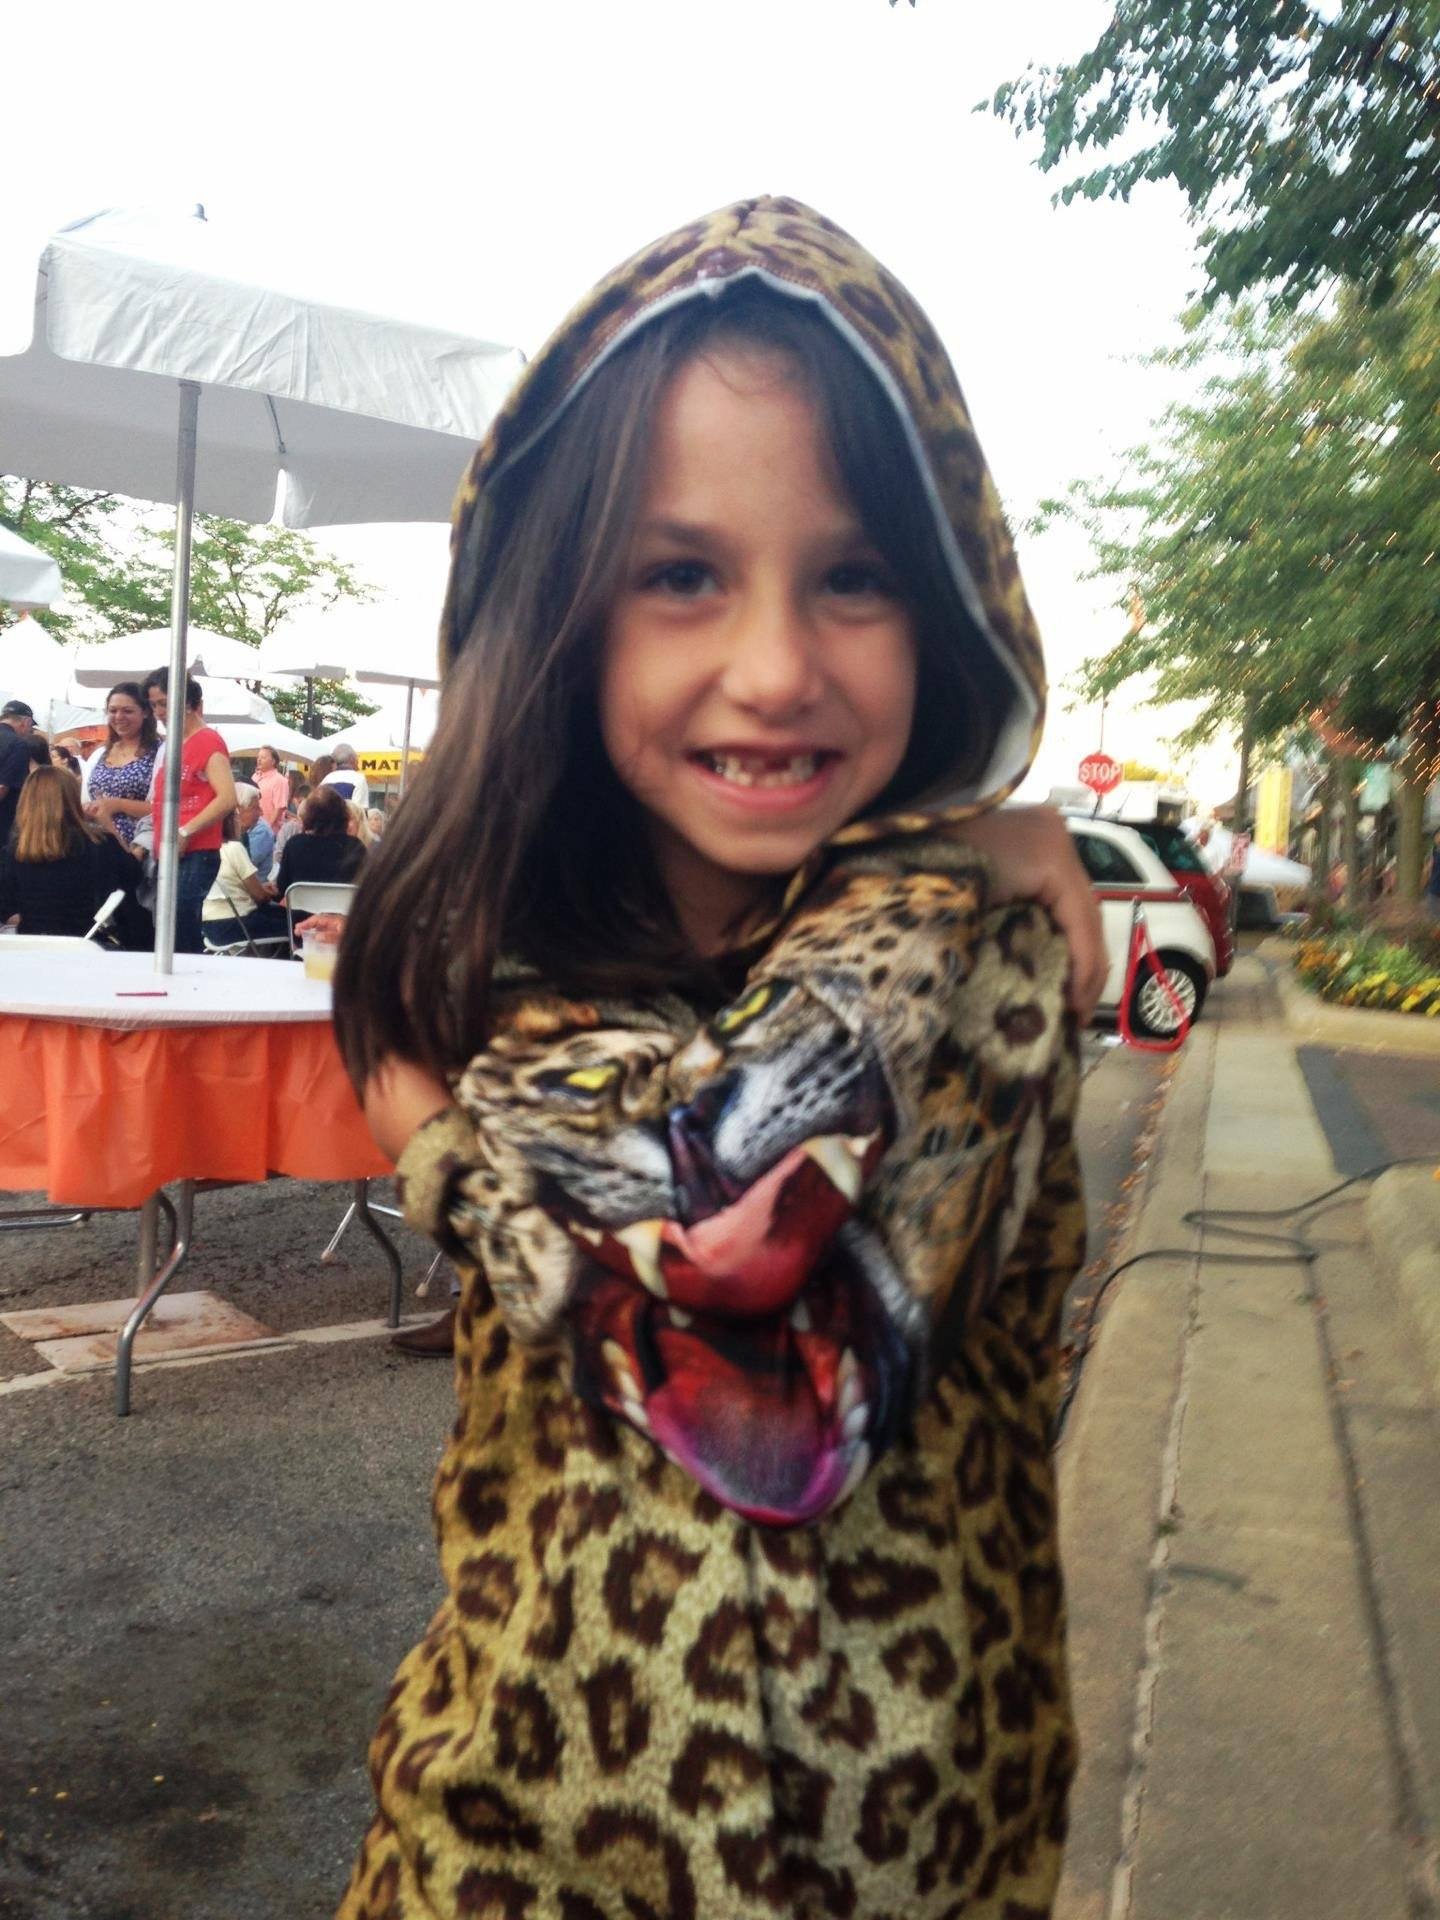 LEOPARD Hoodie Chomp Shirt by MOUTHMAN® Kid's Clothing 